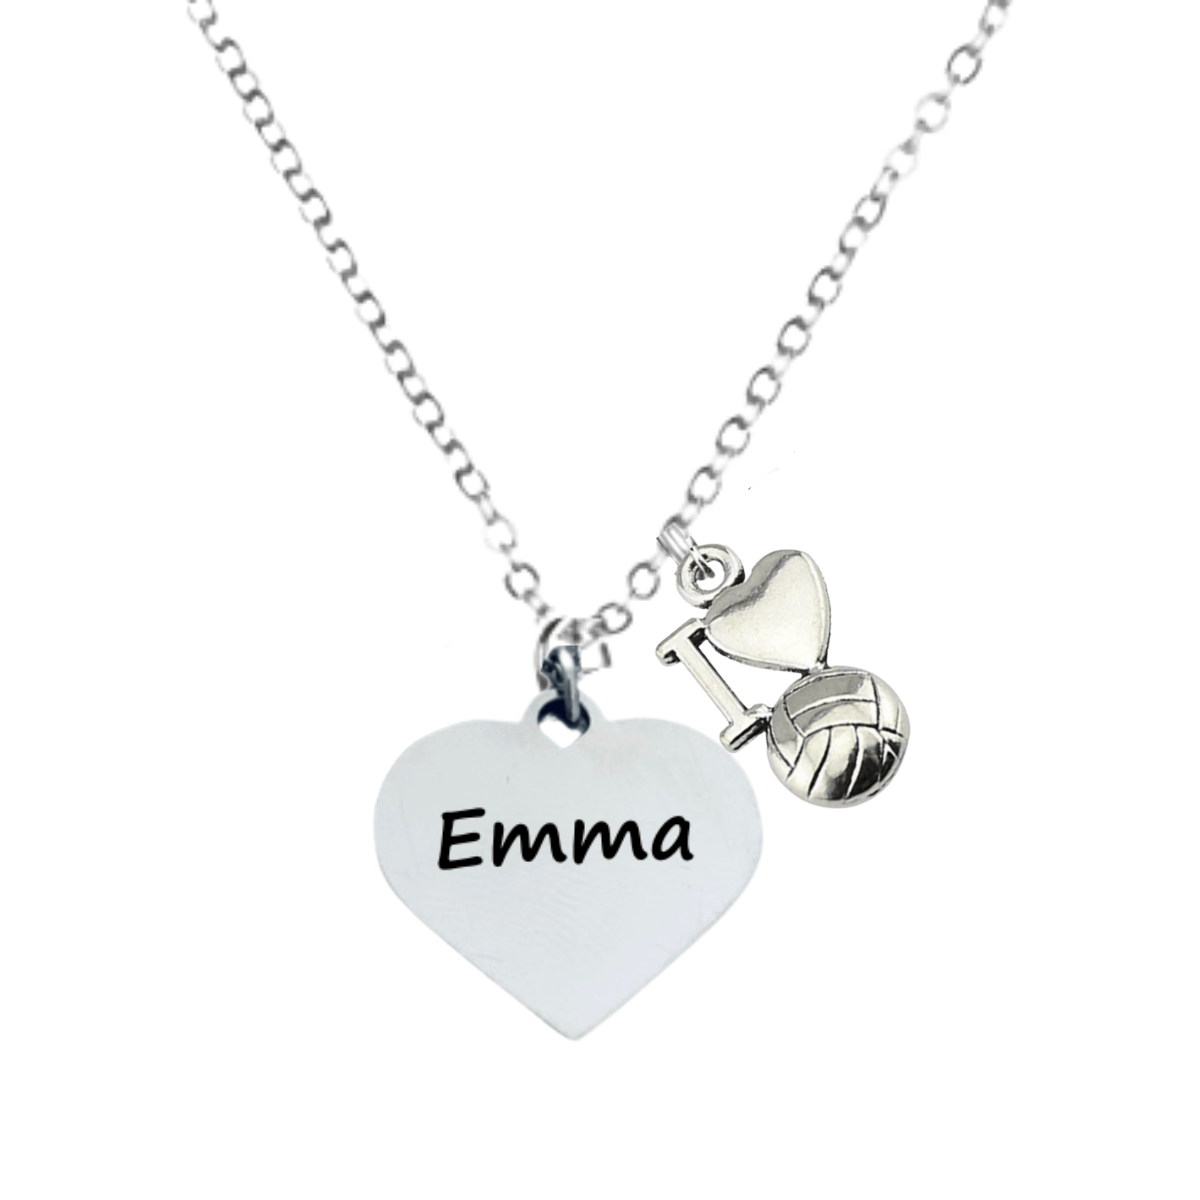 Personalized Engraved Volleyball Heart Necklace